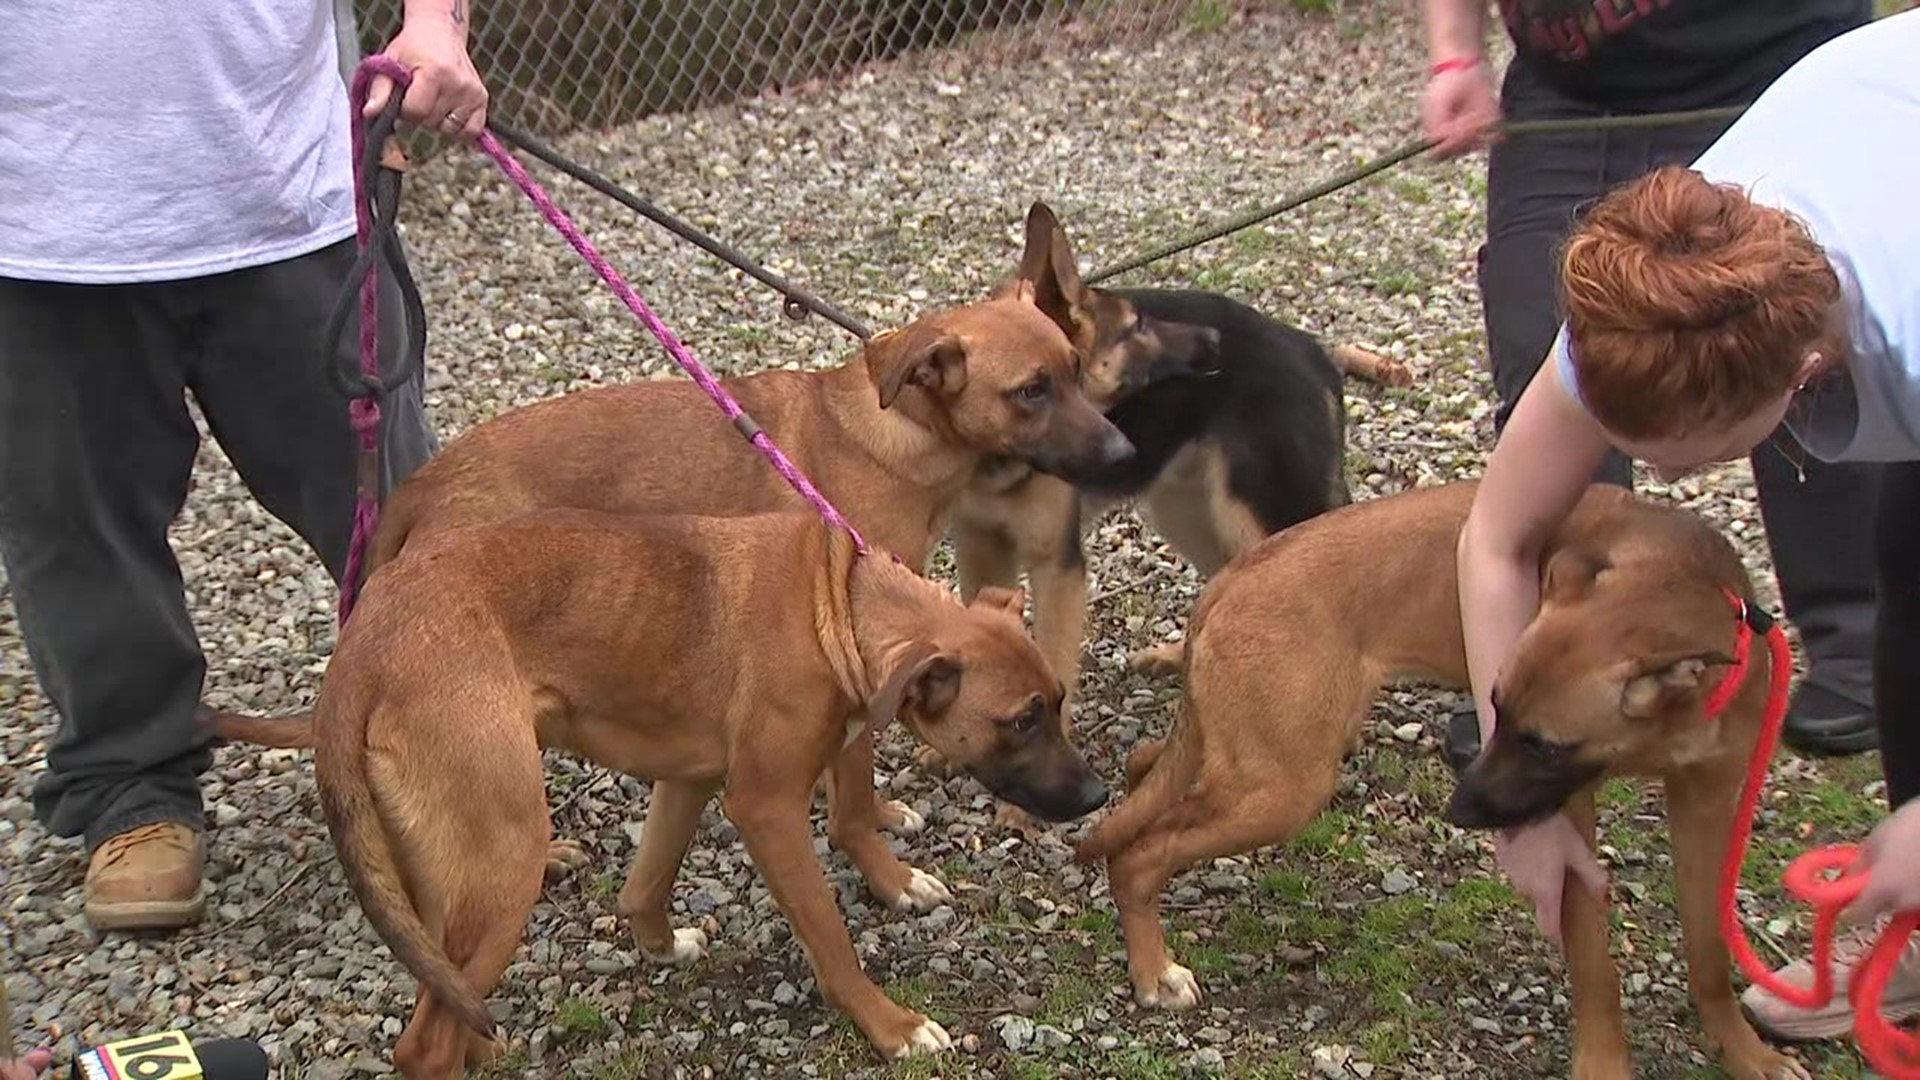 Four of the dogs have been found and taken to an animal shelter; two others remain missing.